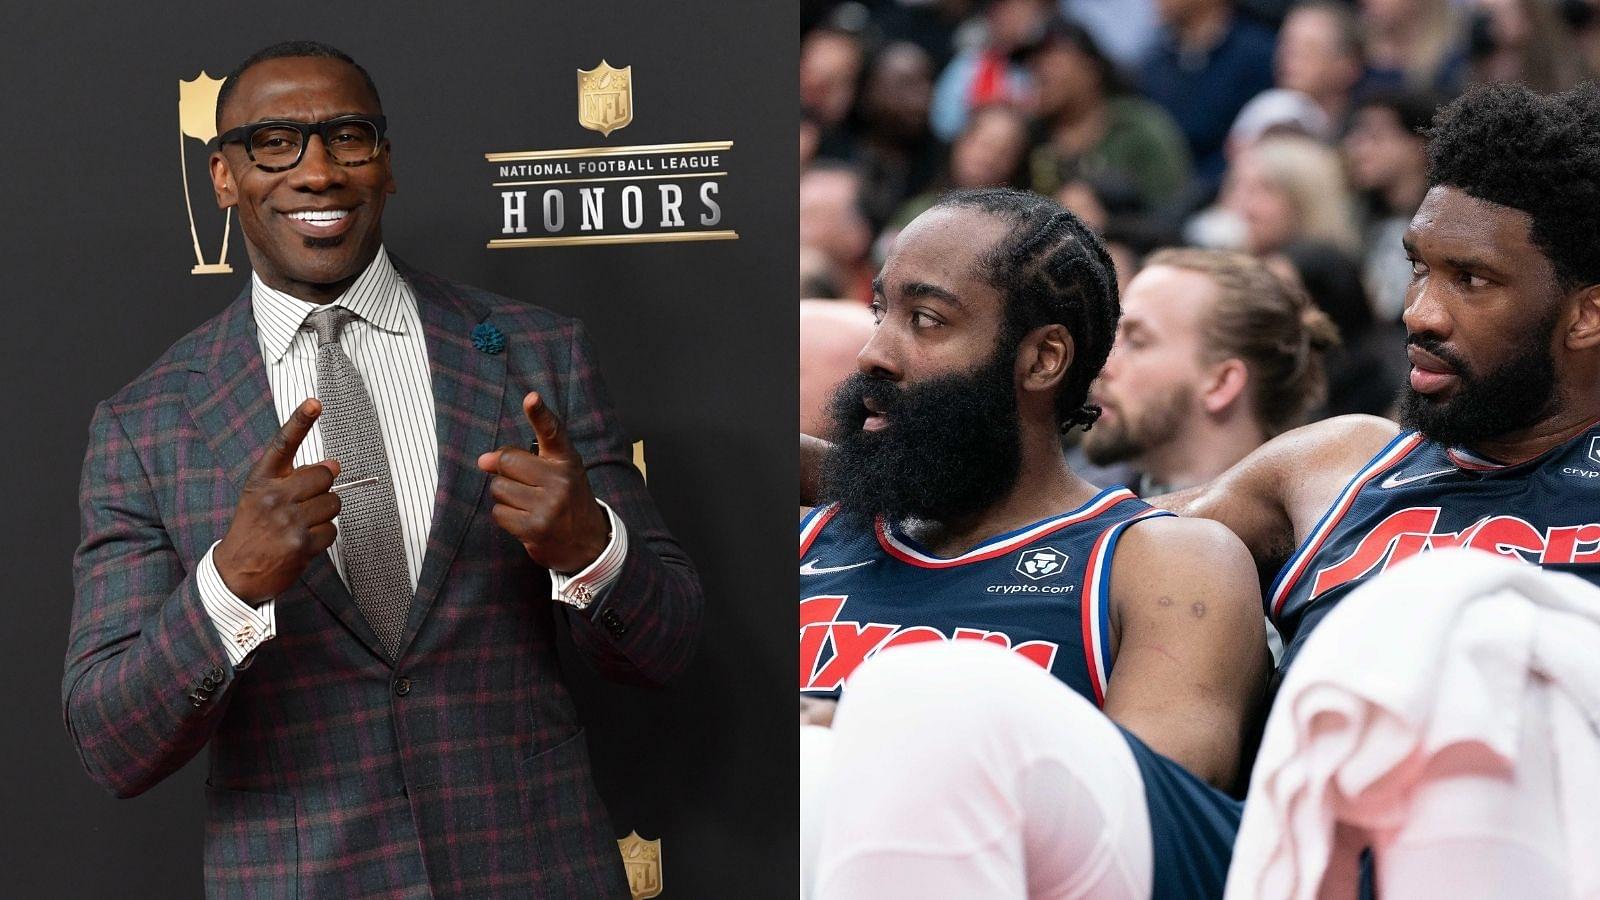 “James harden aging in dog years”: Shannon Sharpe blames The Beard for the Sixers' struggle in winning a game with Joel Embiid's injury trouble